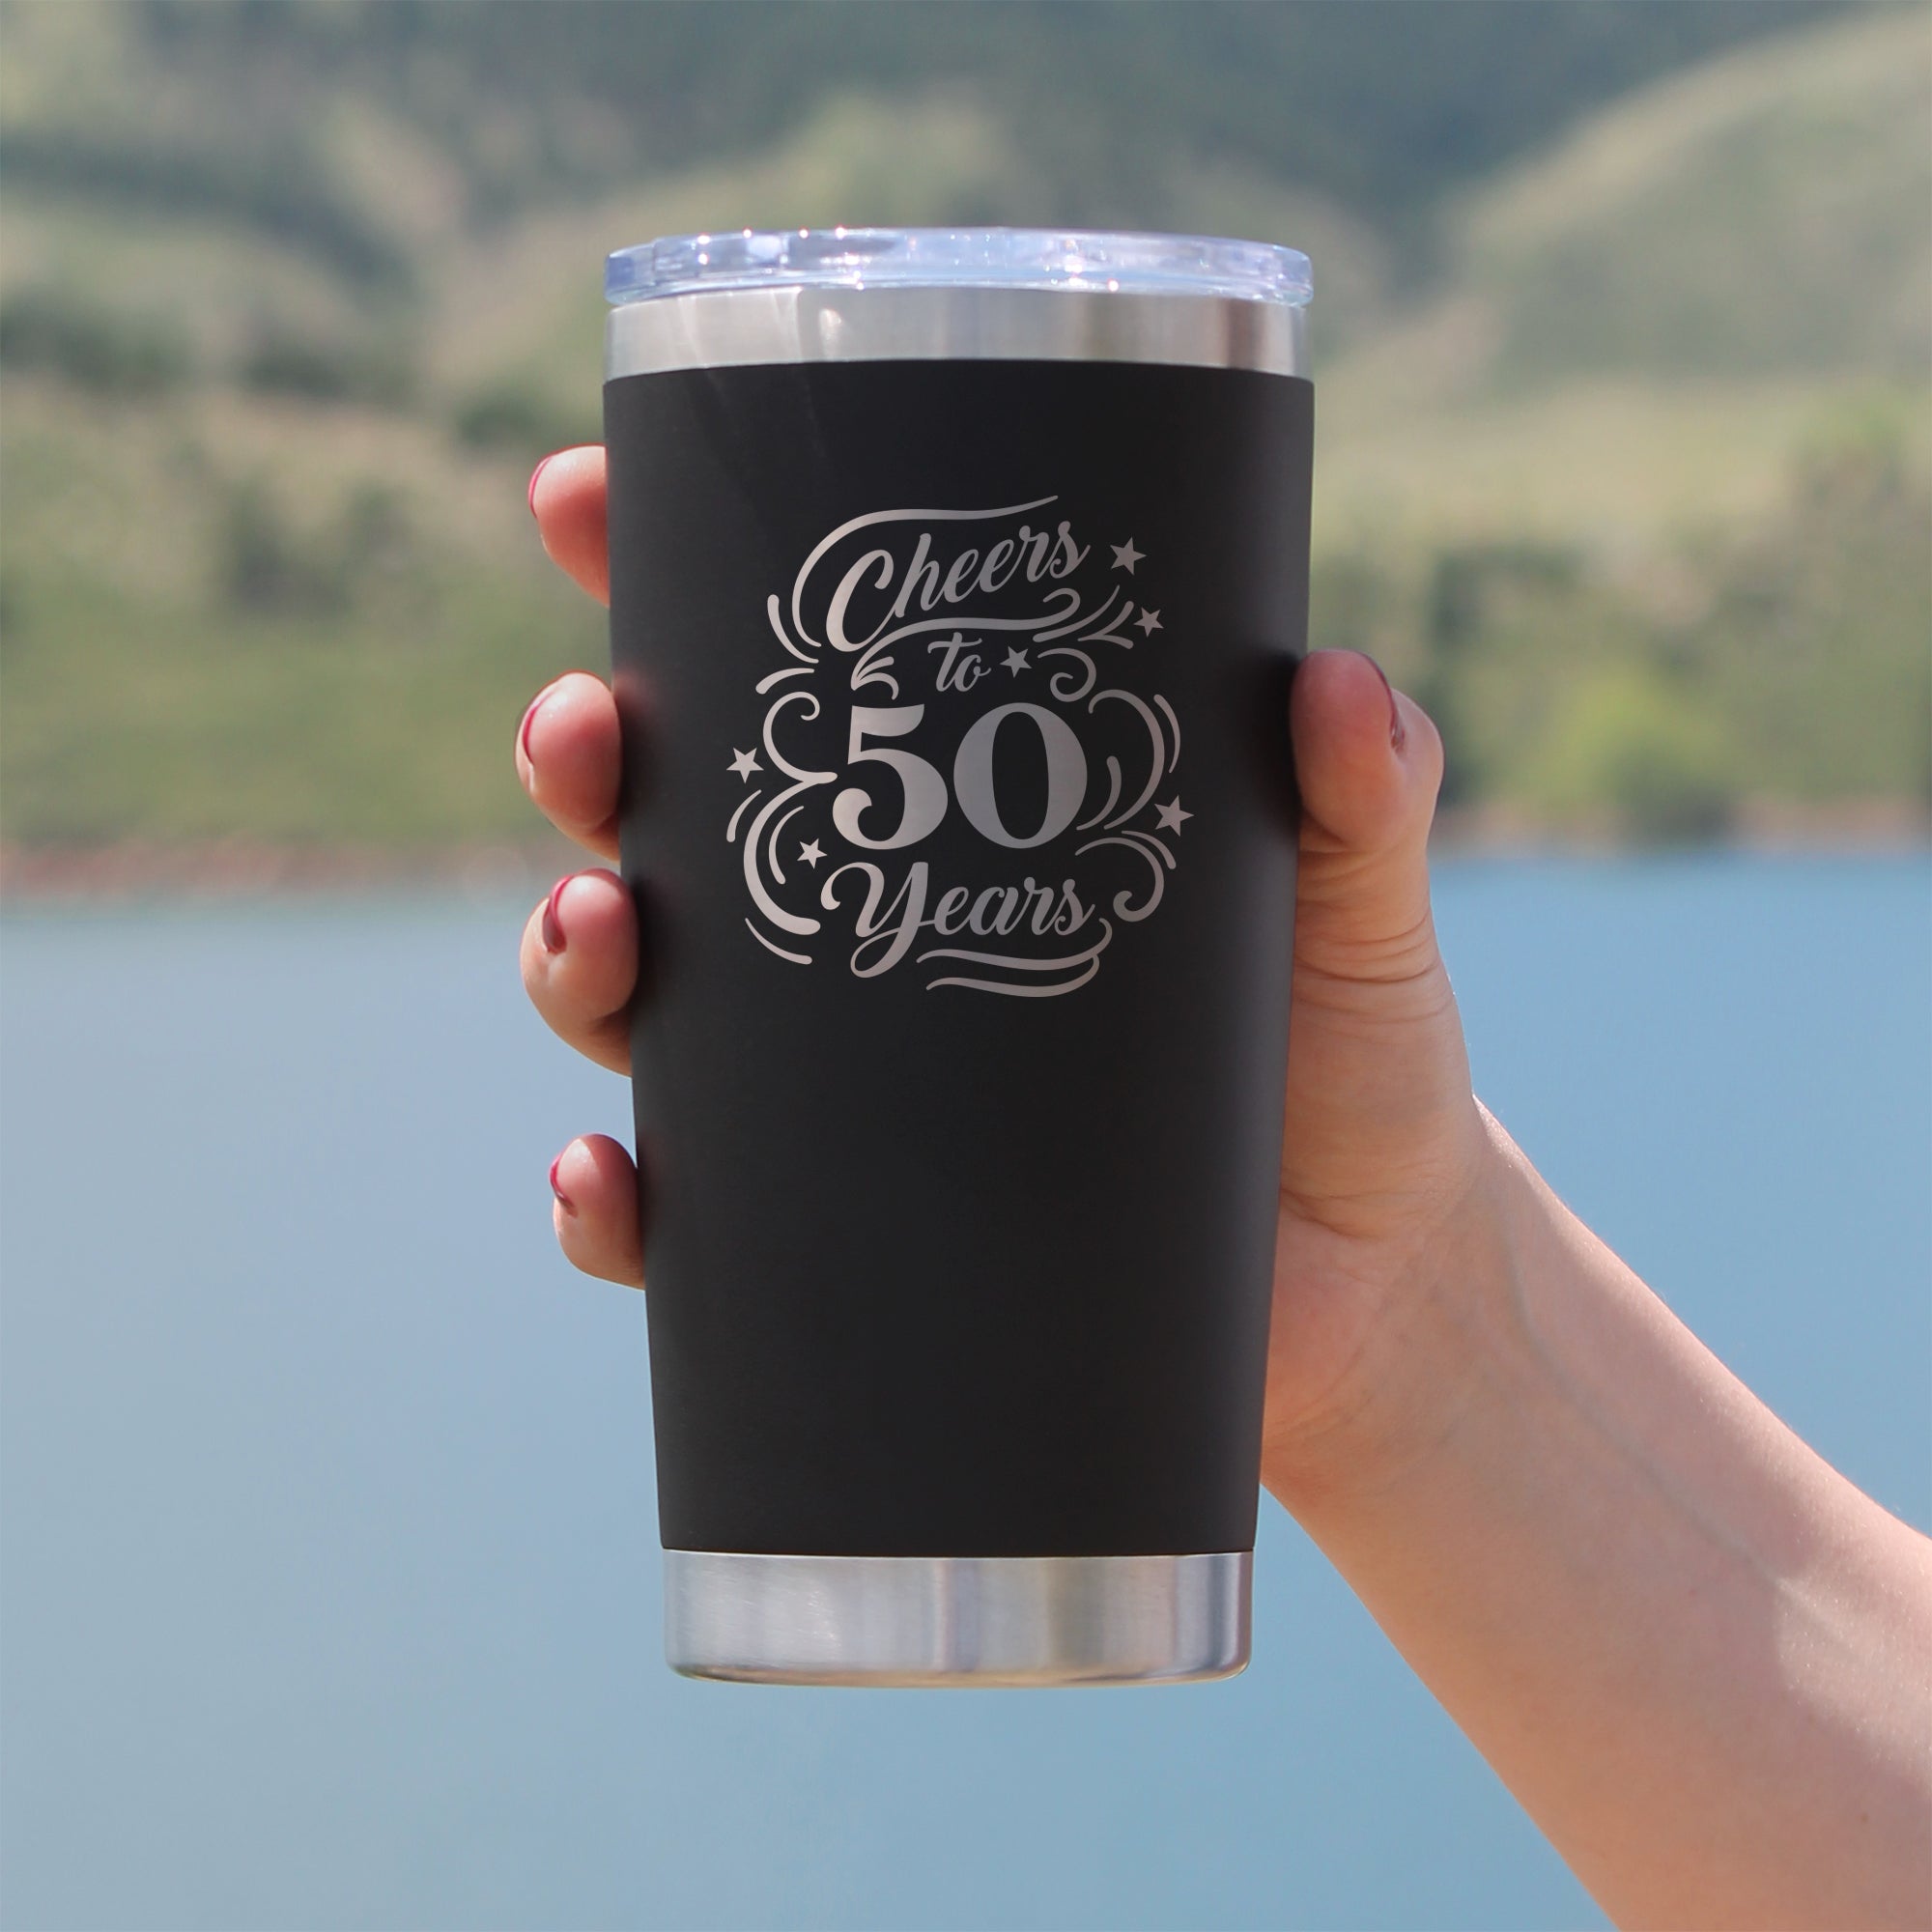 Cheers to 50 Years